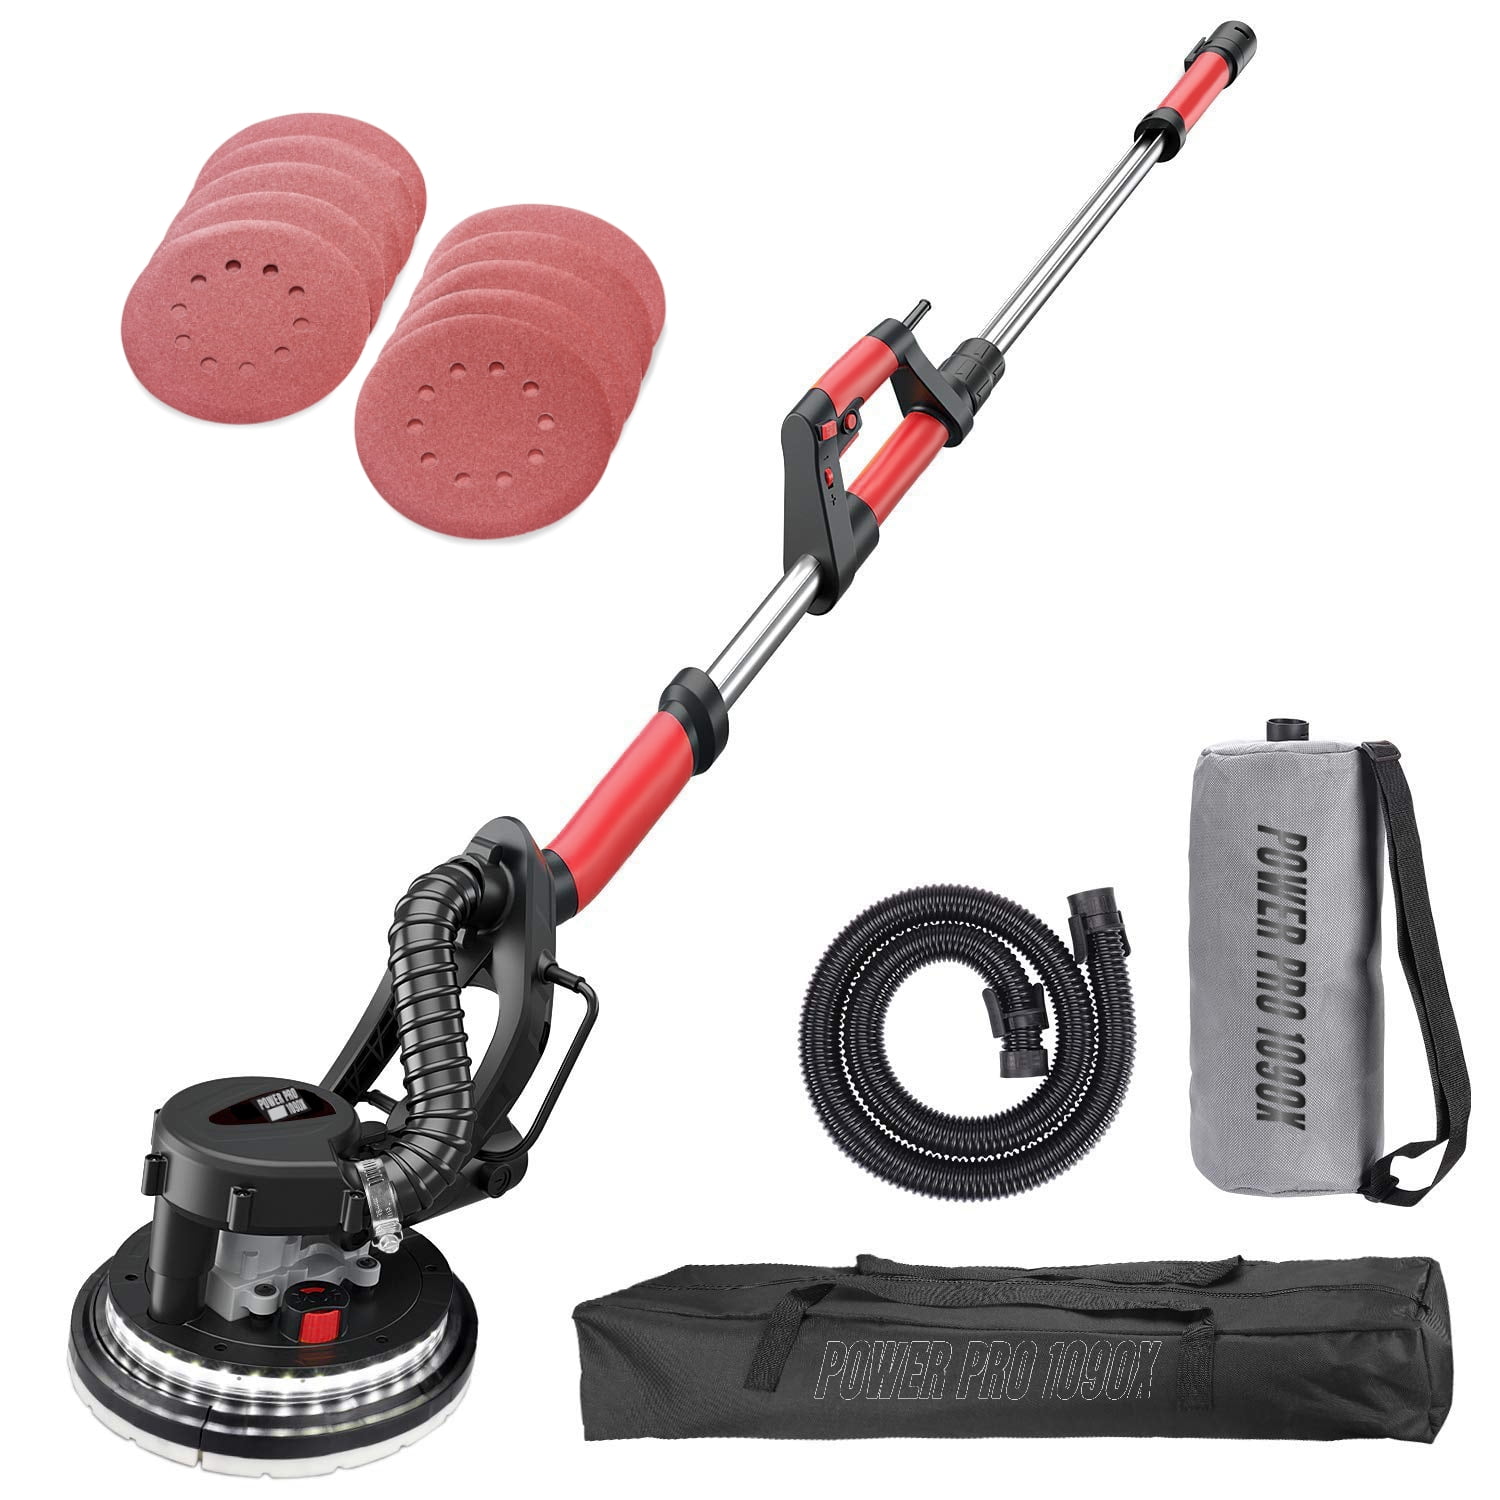 POWER PRO 1090X Electric Drywall Sander - Variable Speed 500-1800RPM, 800W,  with Automatic Vacuum System for Dust Absorption, LED Light, and Carry Bag